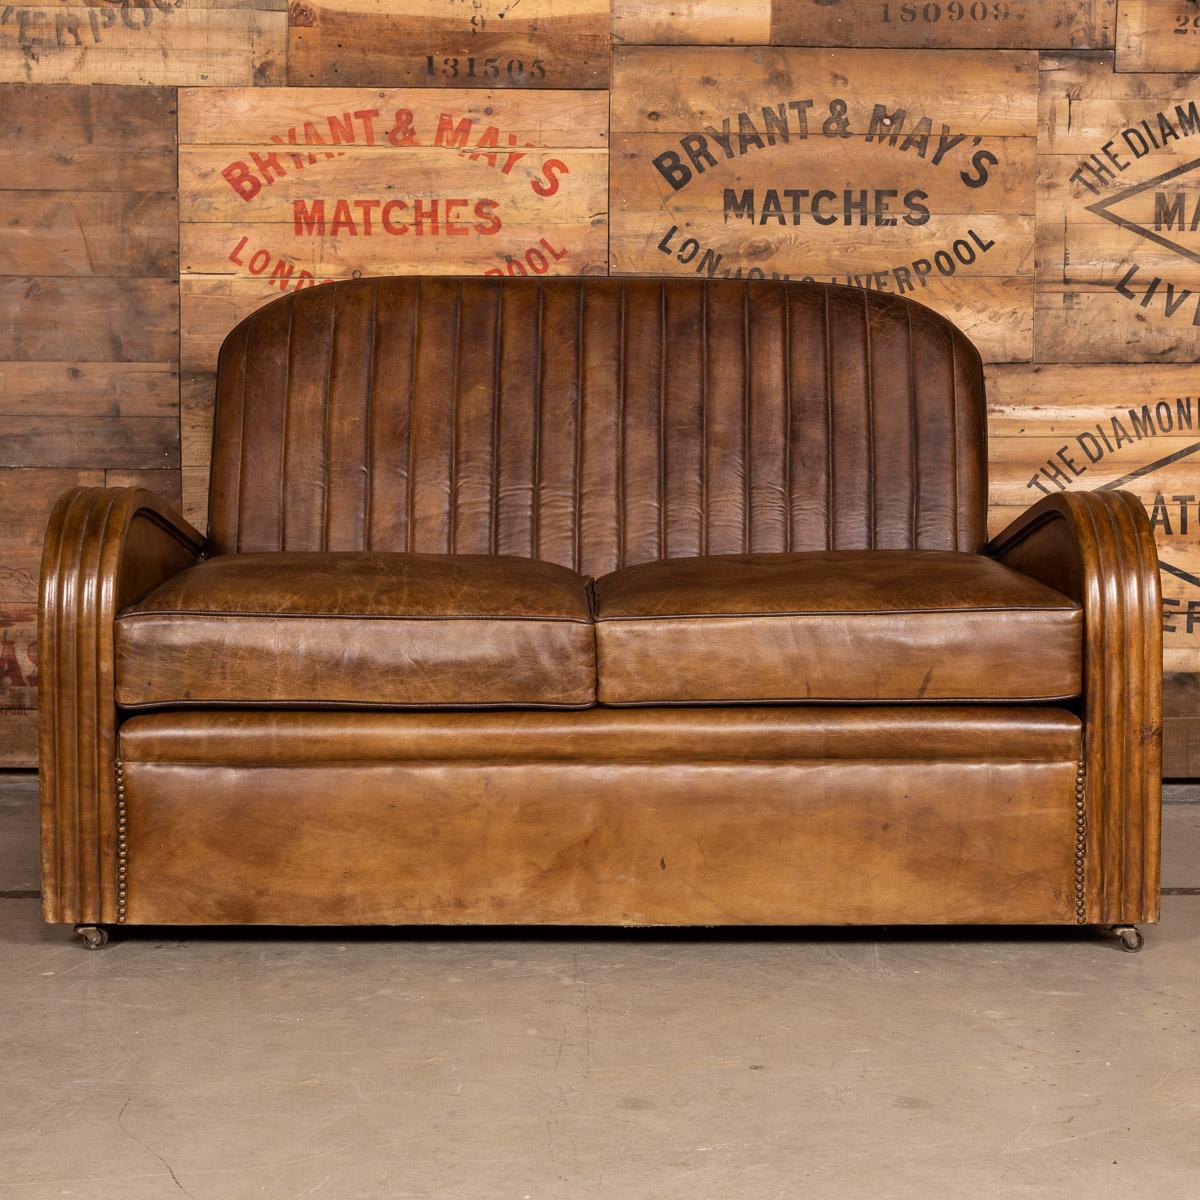 Antique early 20th century Art Deco suite, consisting of a pair of matching tub chairs and a sofa. Showing superb patina and color, this wonderful pair of club chairs were hand upholstered sheepskin leather by the finest craftsmen and mounted with